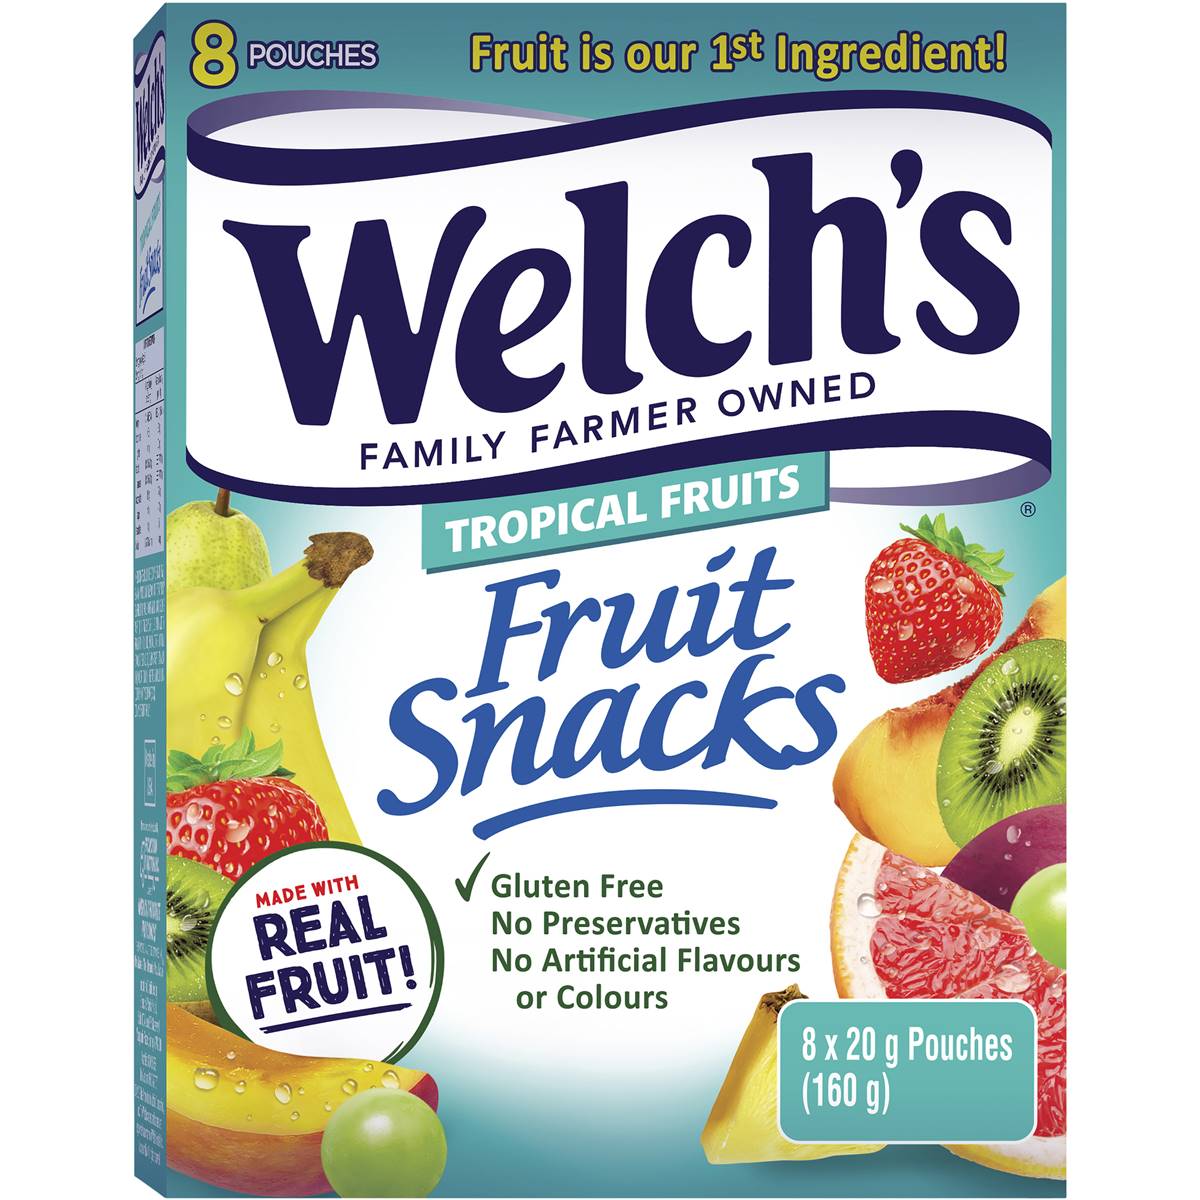 Calories in Welch's Tropical Fruits Fruit Snacks